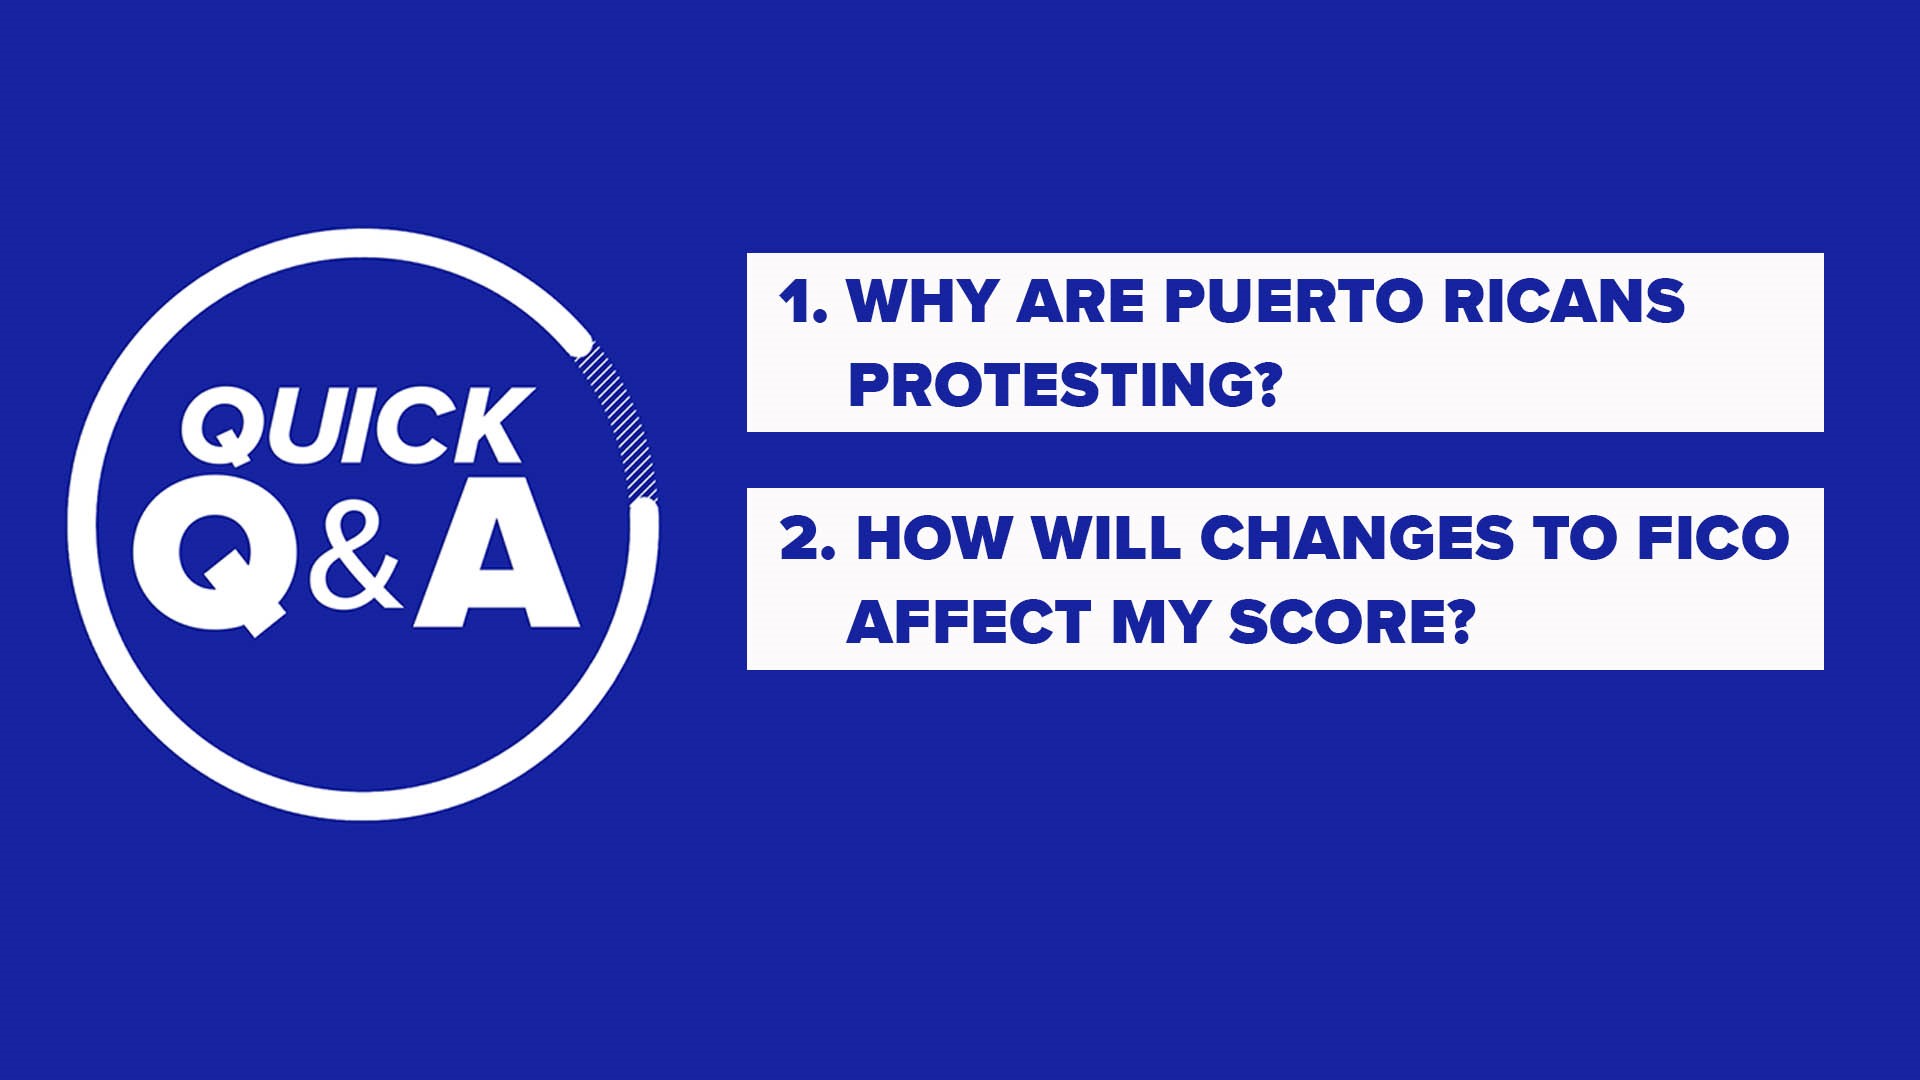 Wondering what's going on with those protests in Puerto Rico? How about those new FICO changes, how will they affect you? We've got you covered...quickly